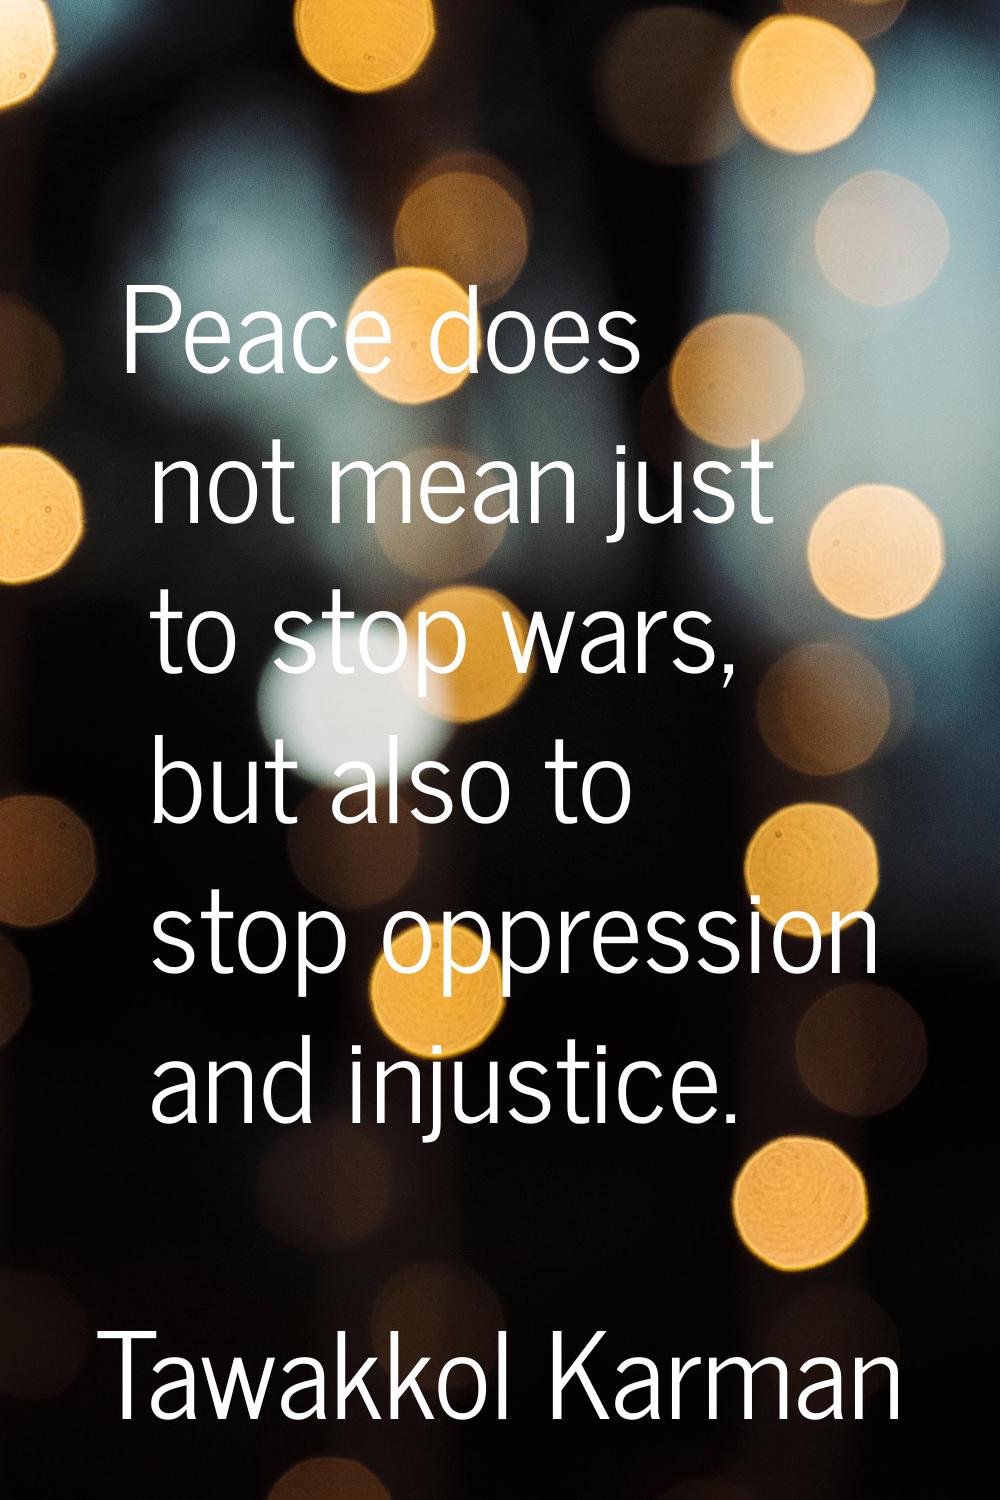 Peace does not mean just to stop wars, but also to stop oppression and injustice.